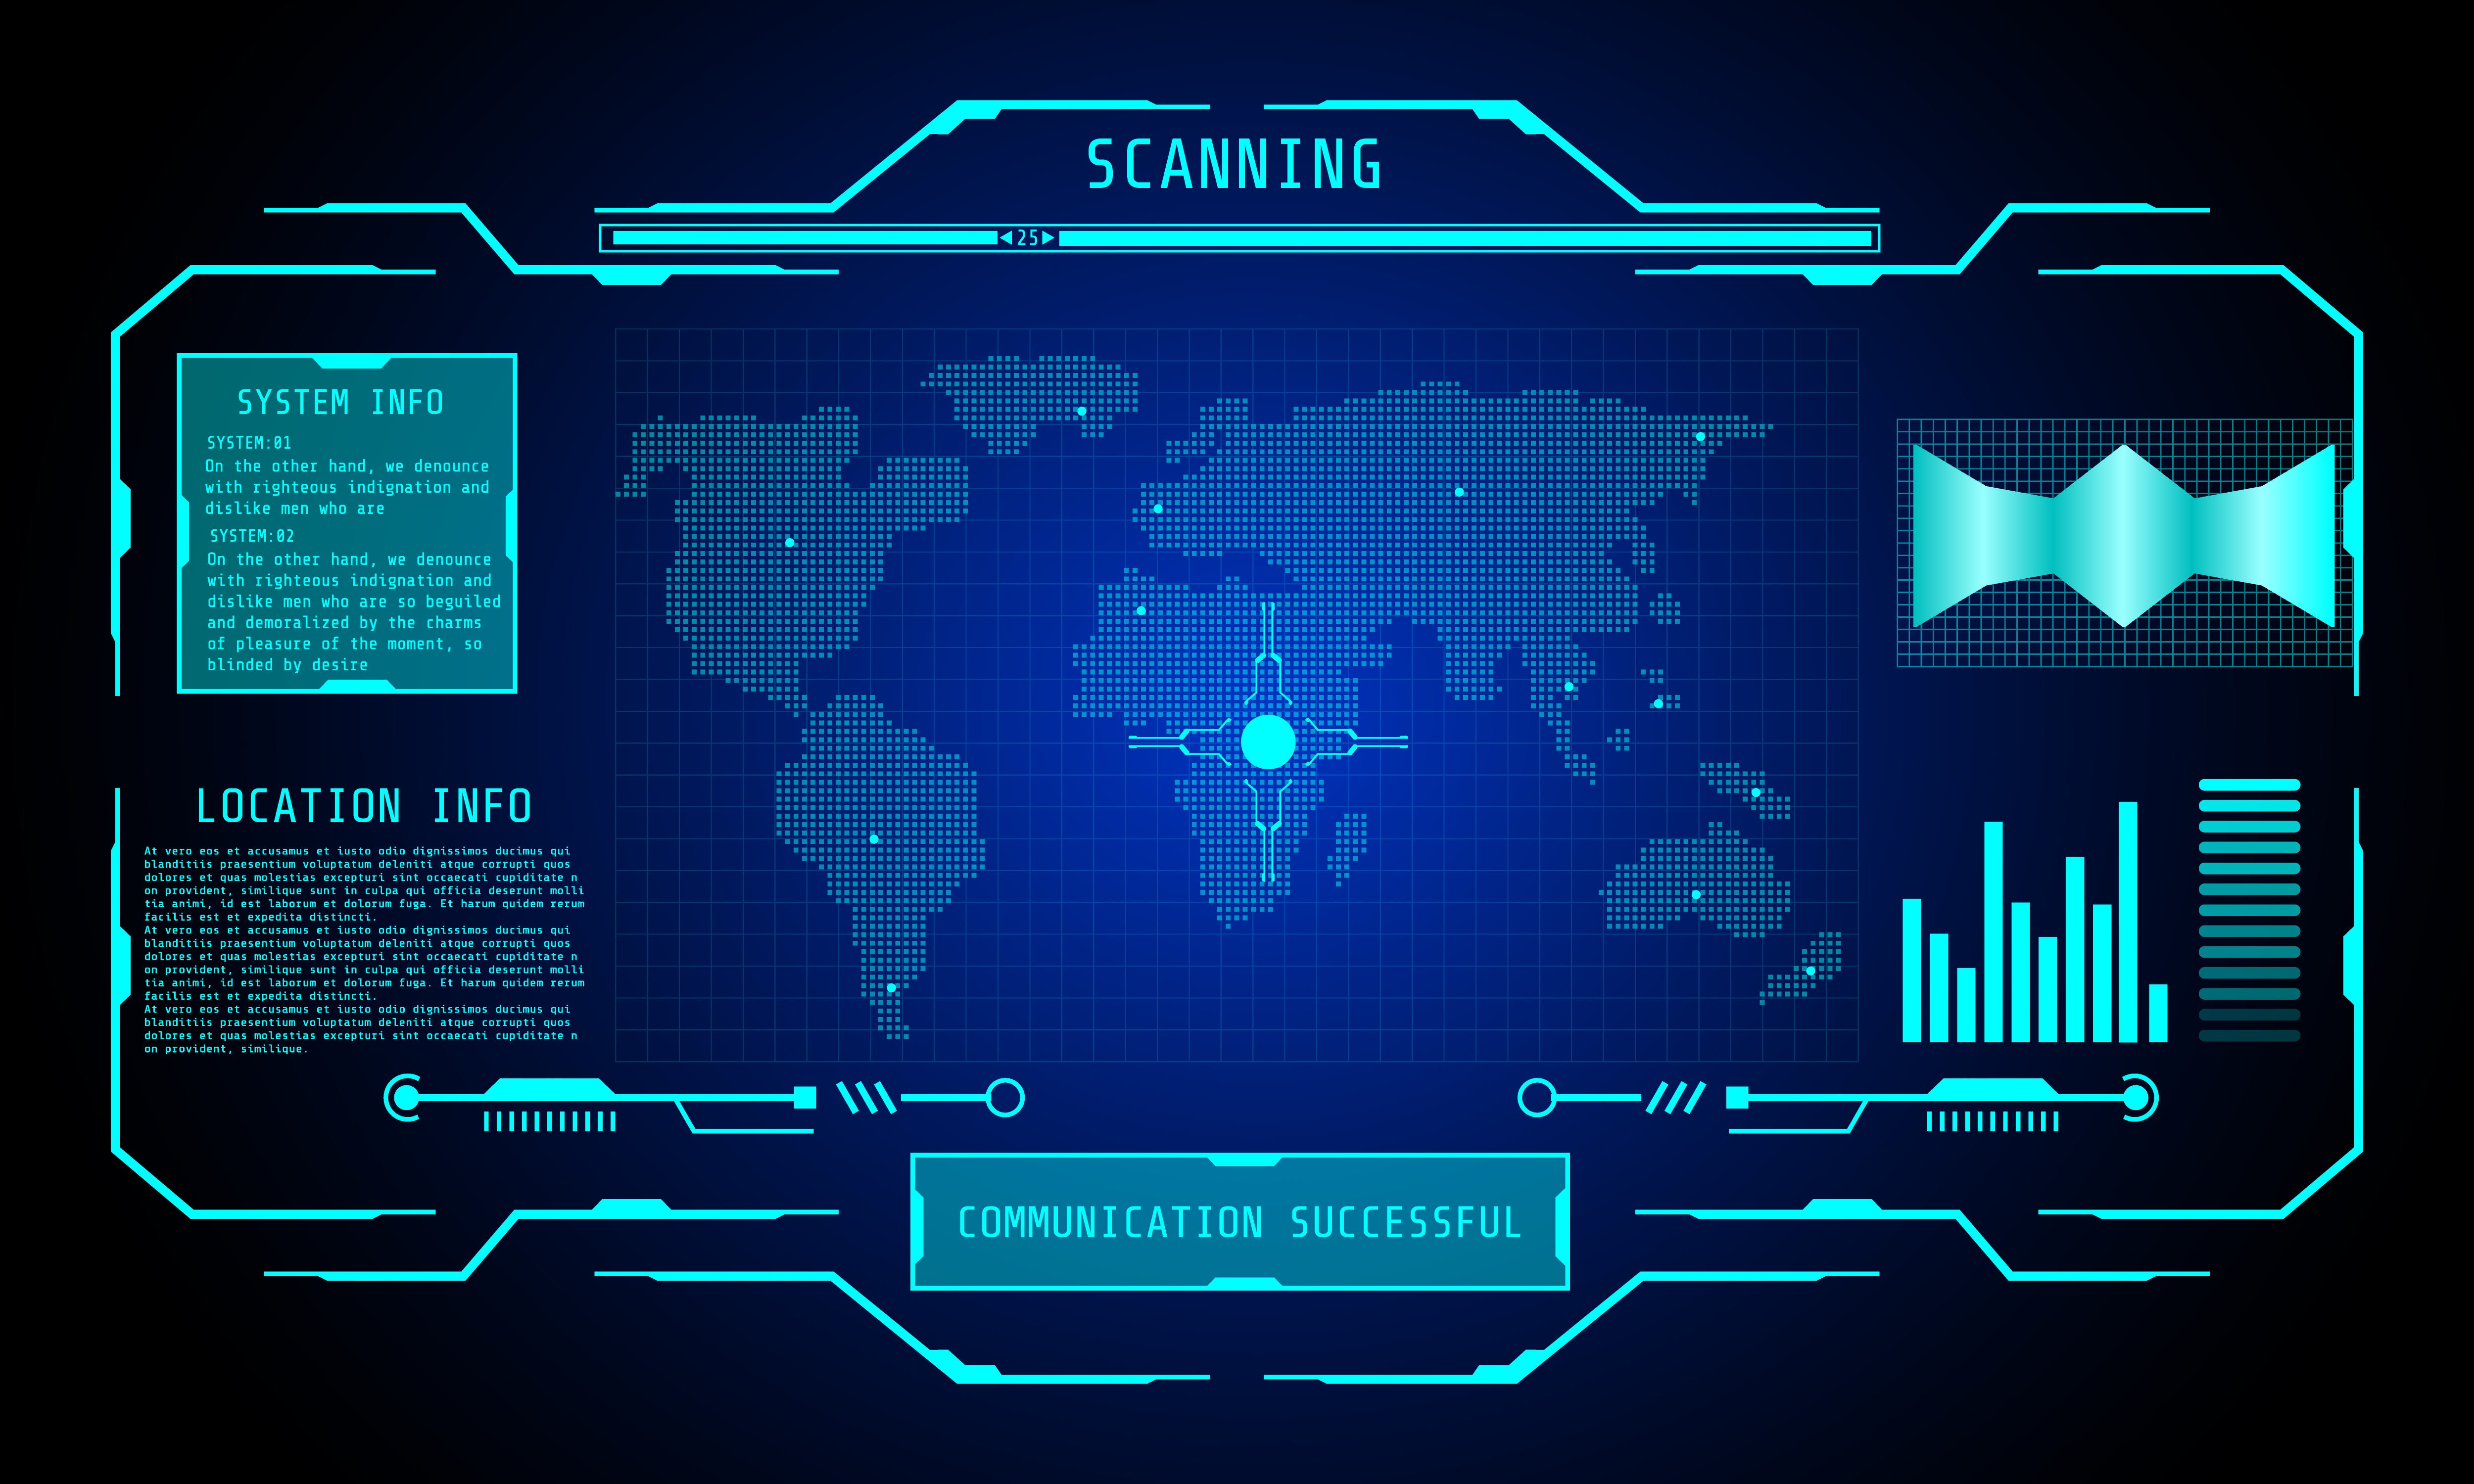 sci fi interface with map and communication successful message